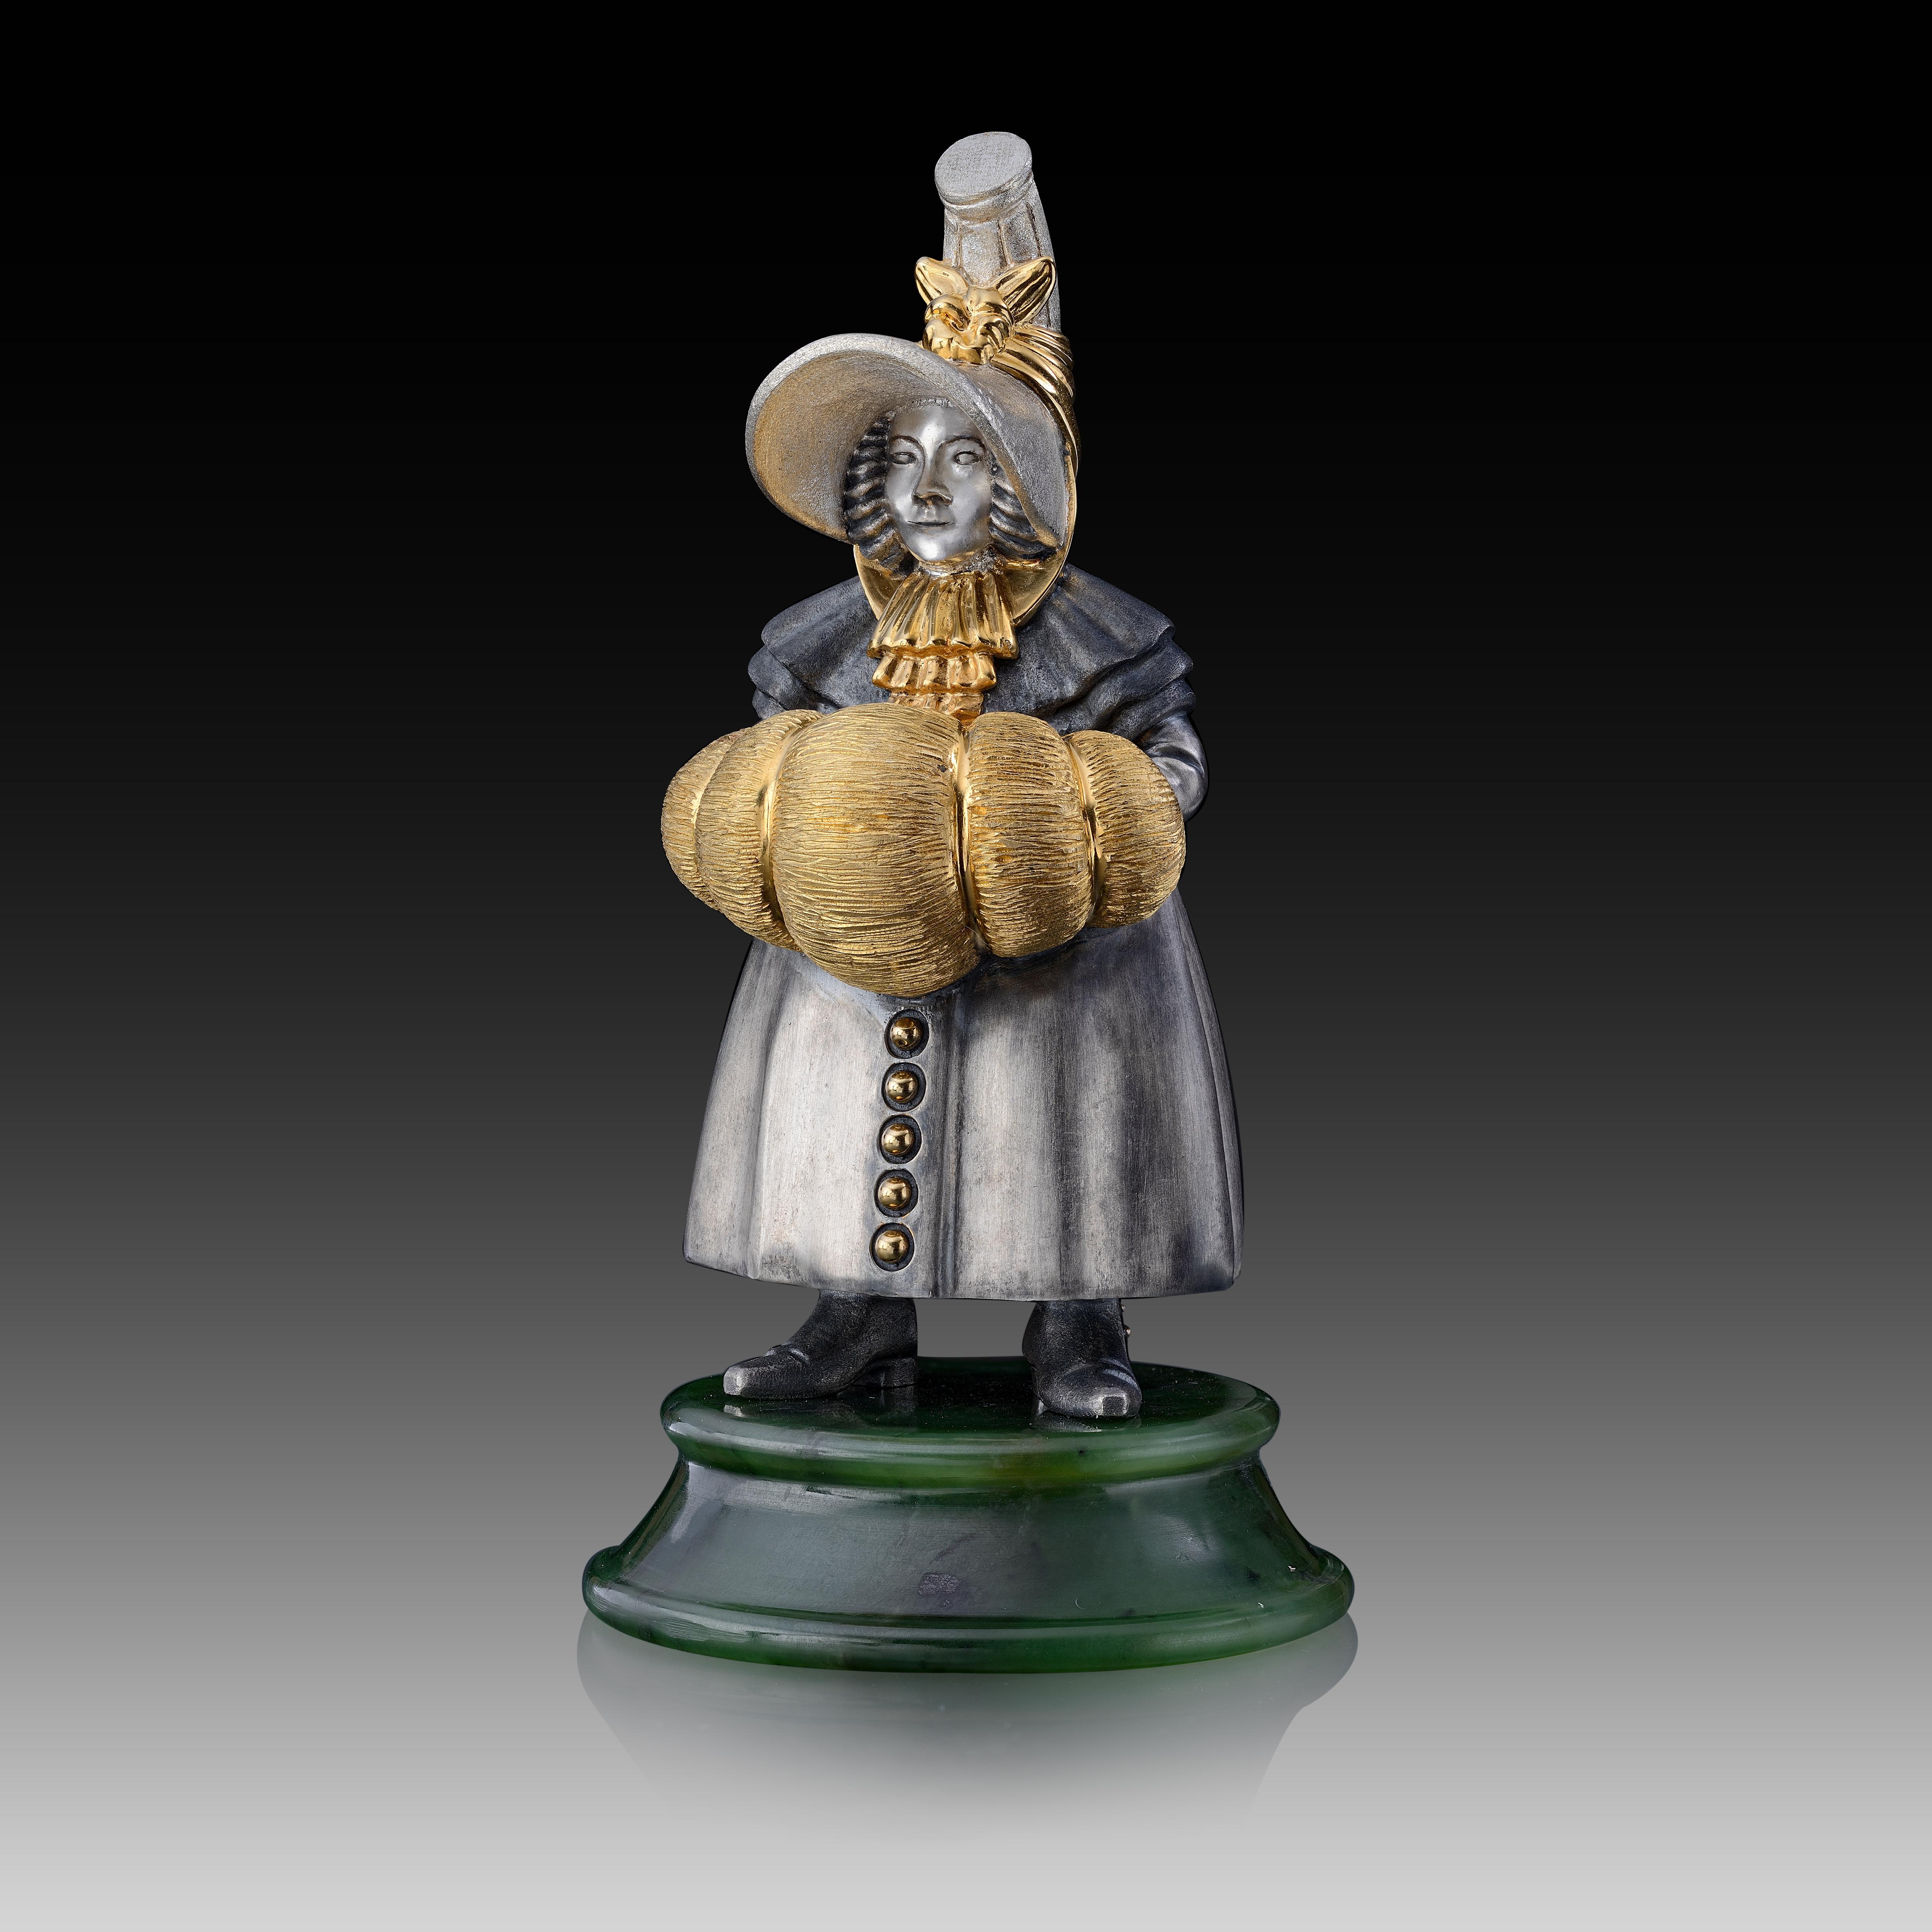 Original sterling silver 22k multiple sculpture with 24k gold plating, jade stand, stamped by the artist

Departing Guests. In a series of 12 figurines depicting simply the departing guests from a scene in The Nutcracker, Mihail Chemiakin has